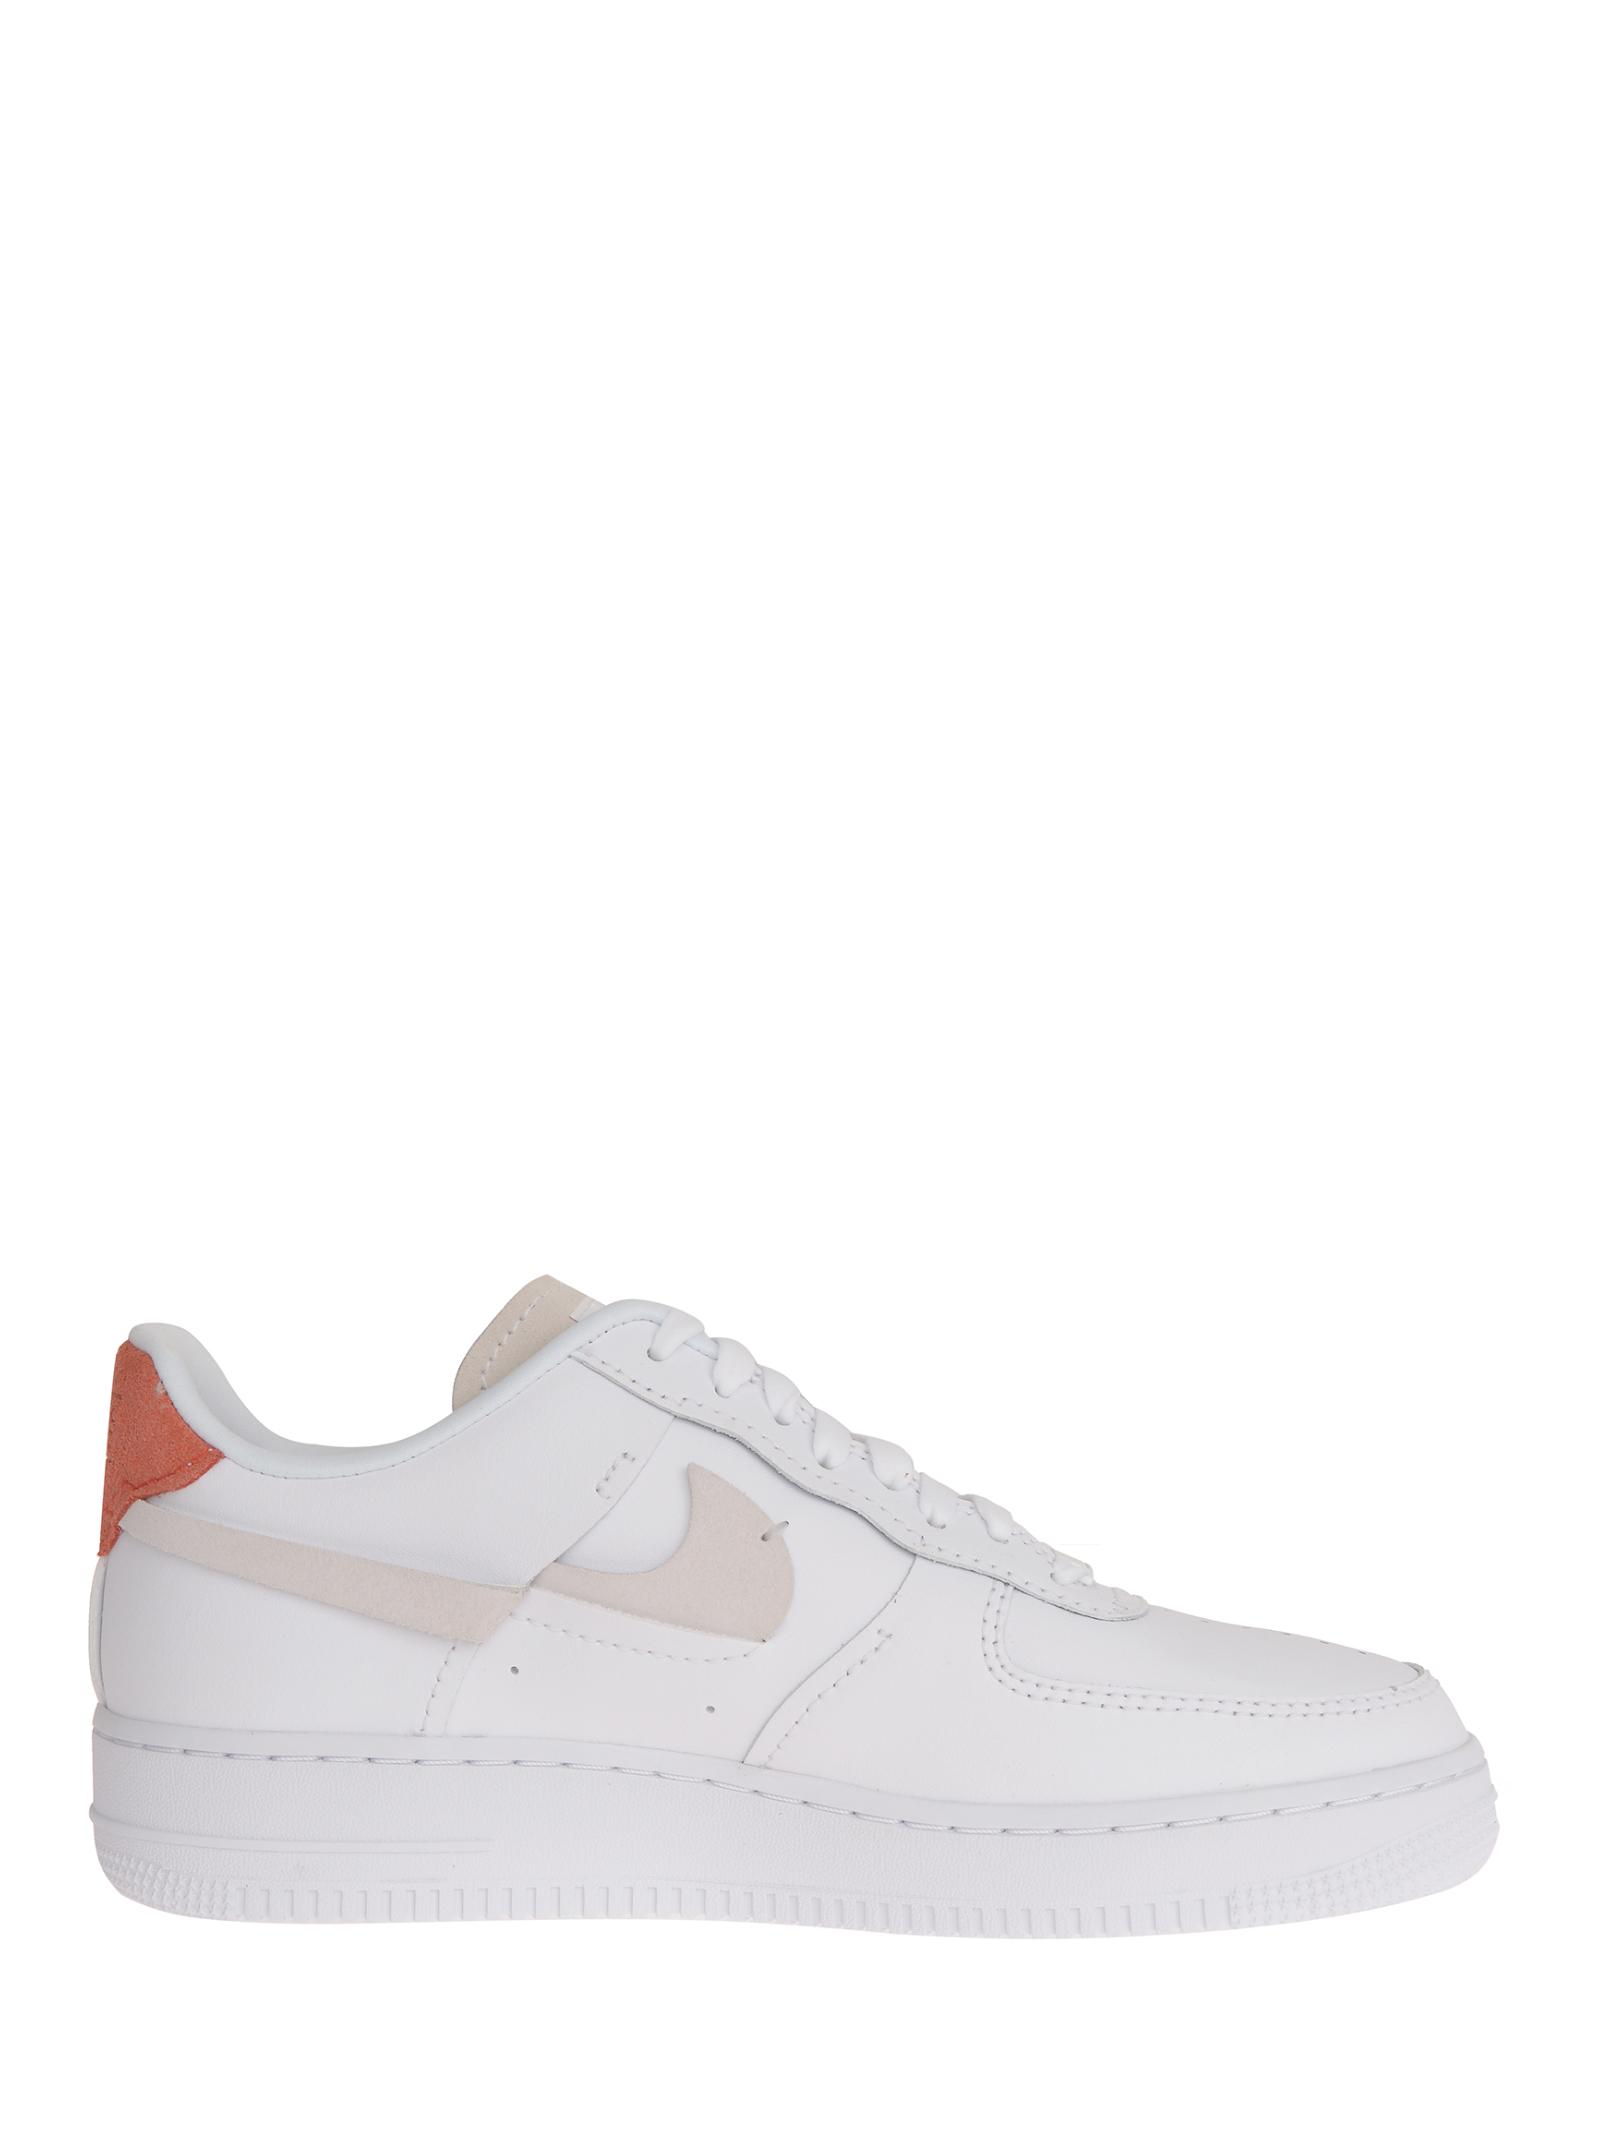 Nike White Air Force 1 '07 Leather Sneakers With Orange Back On One Shoe  And Blue On The Other. | Lyst